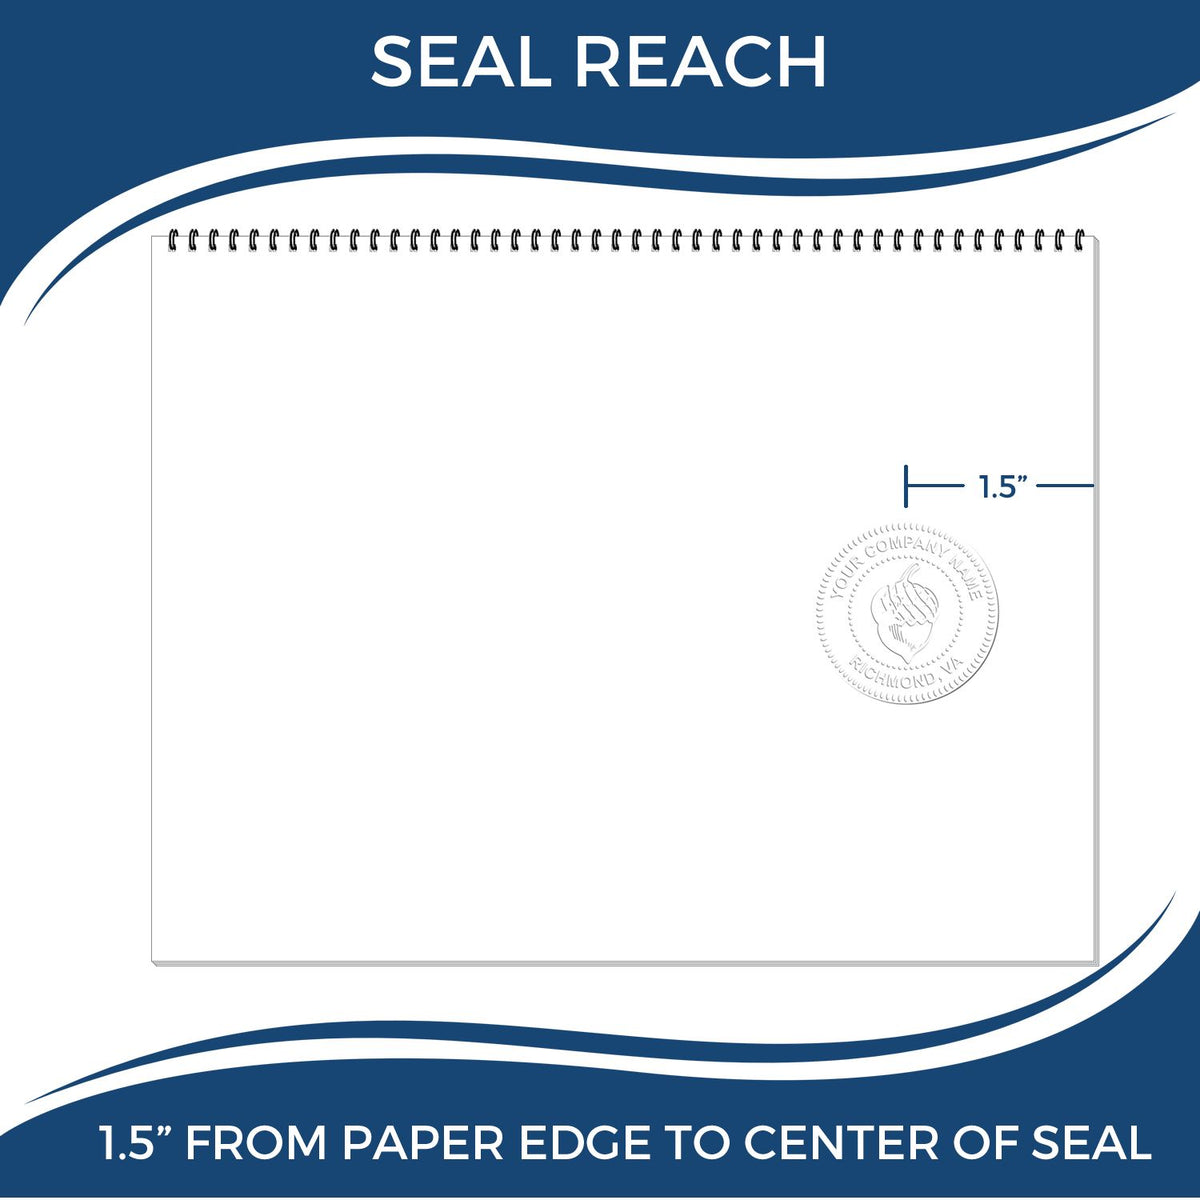 An infographic showing the seal reach which is represented by a ruler and a miniature seal image of the Hybrid Tennessee Landscape Architect Seal